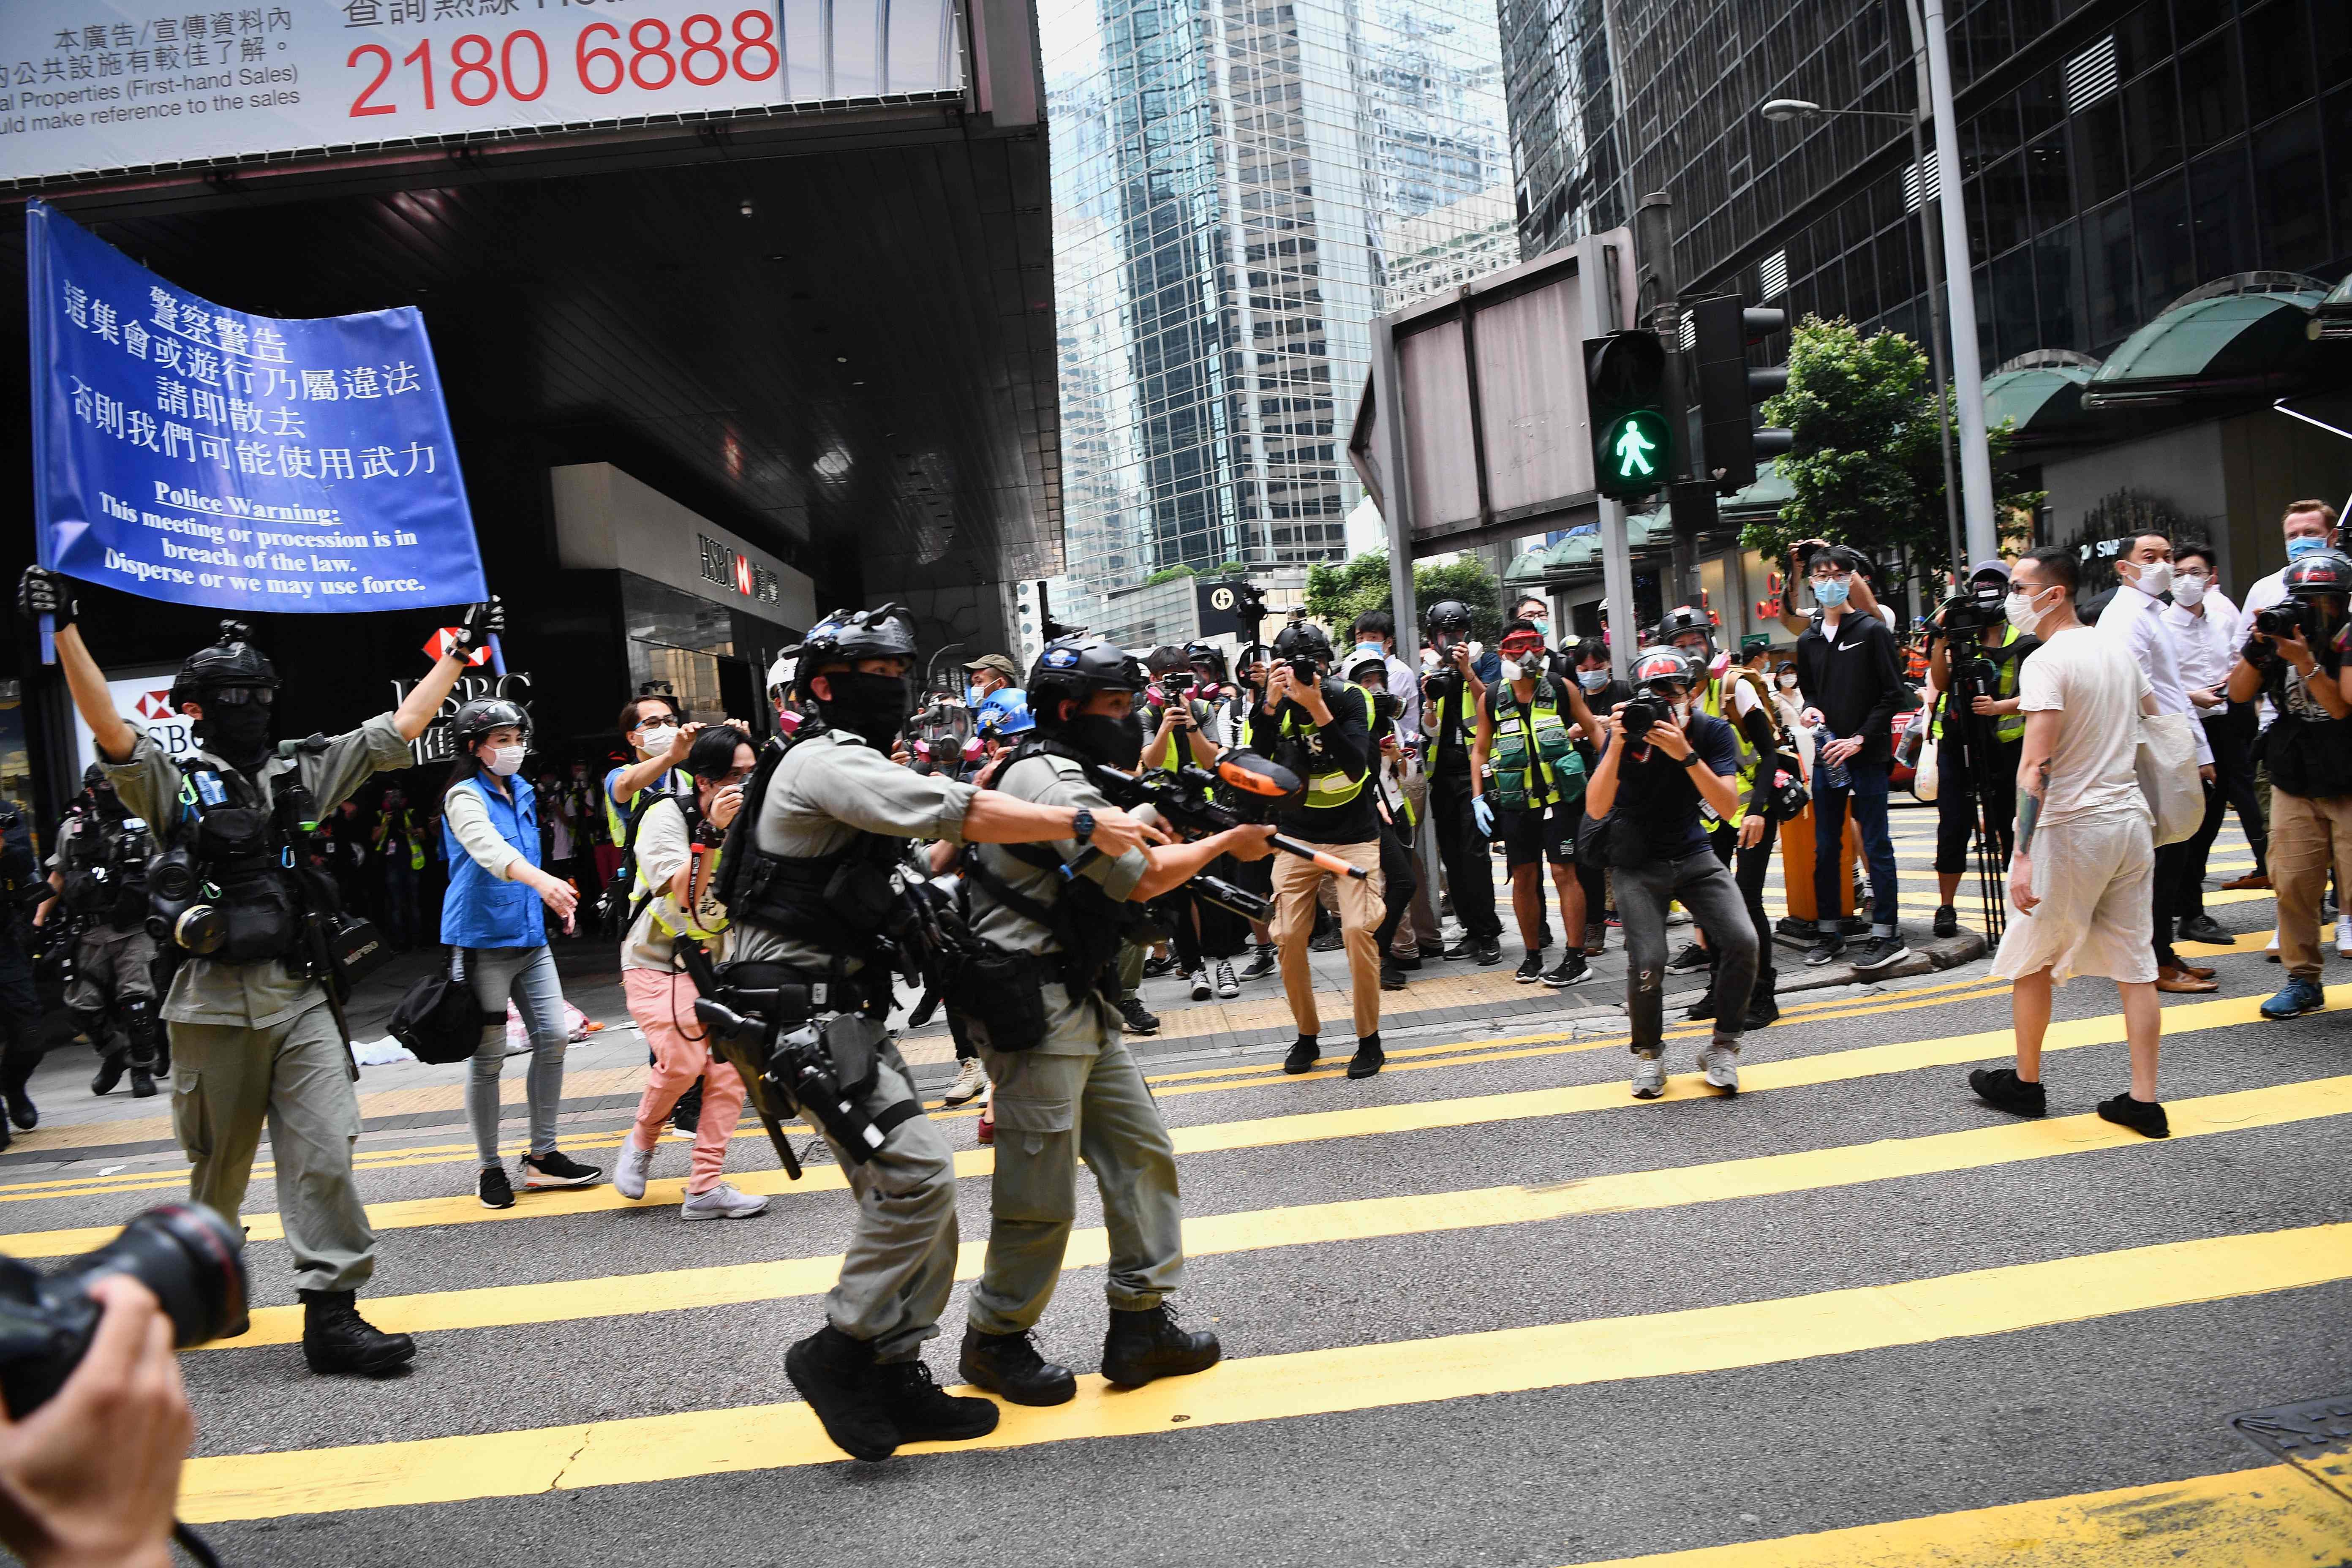 Hong Kong riot police (L) issue a warning as they plan to clear away people gathered in the Central district of downtown Hong Kong on May 27, 2020, as the city's legislature debates over a law that bans insulting China's national anthem. (AFP Photo)